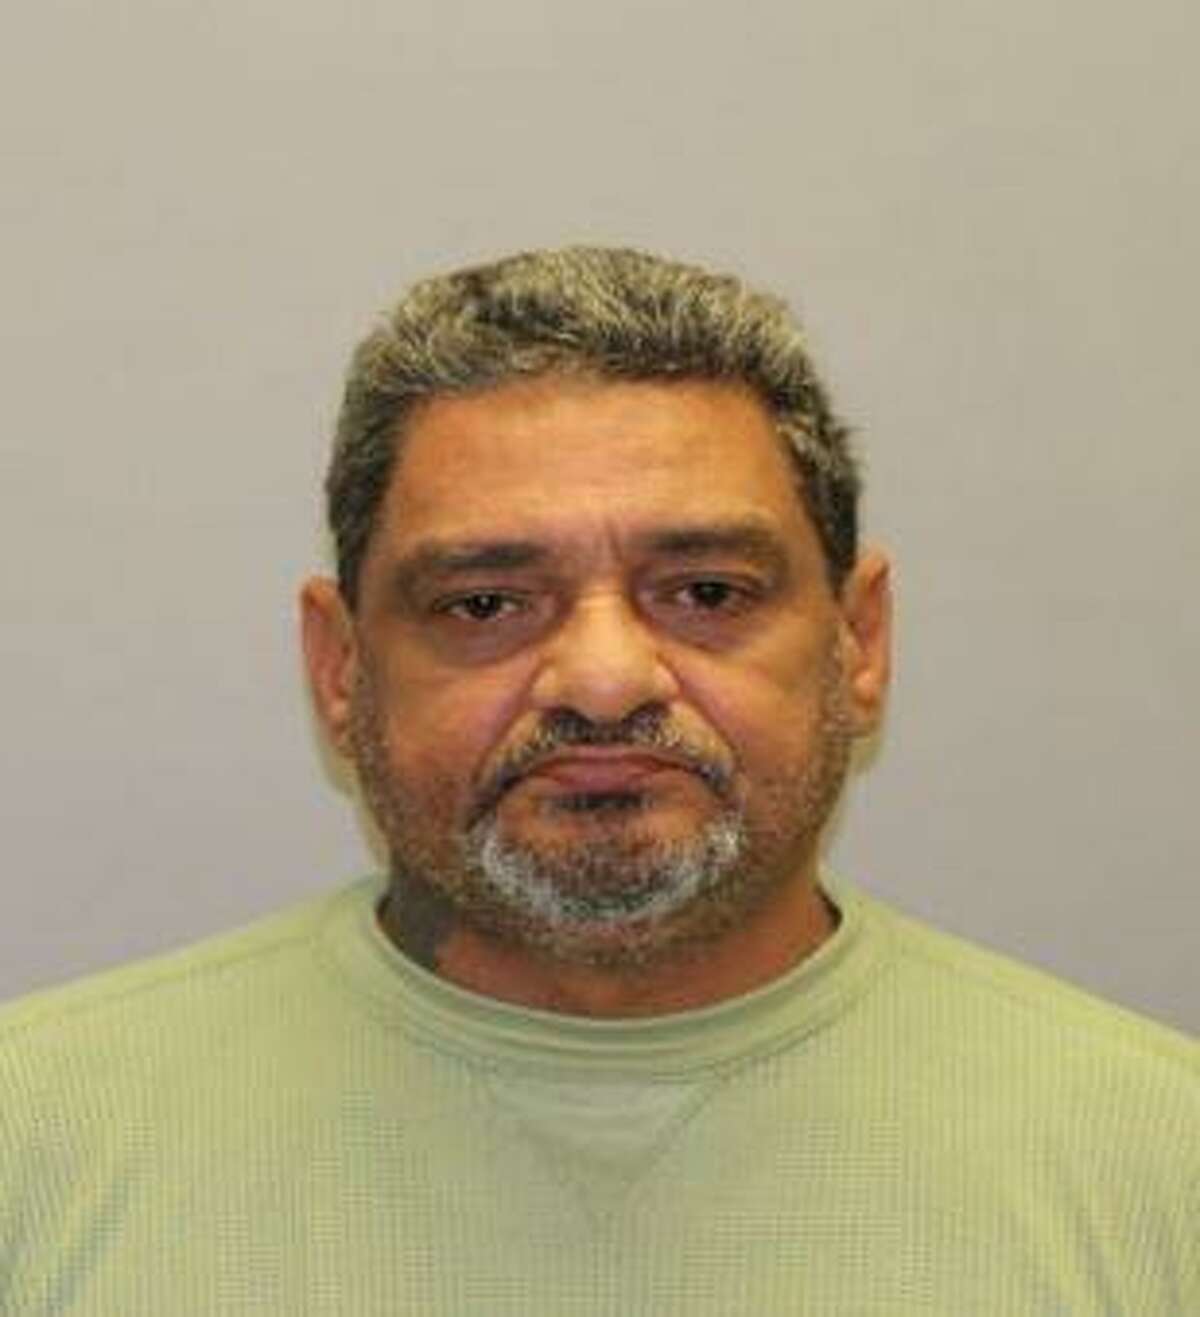 Police are looking for Abdias Cortes, 59, who is accused of a domestic assault that took place Christmas morning.